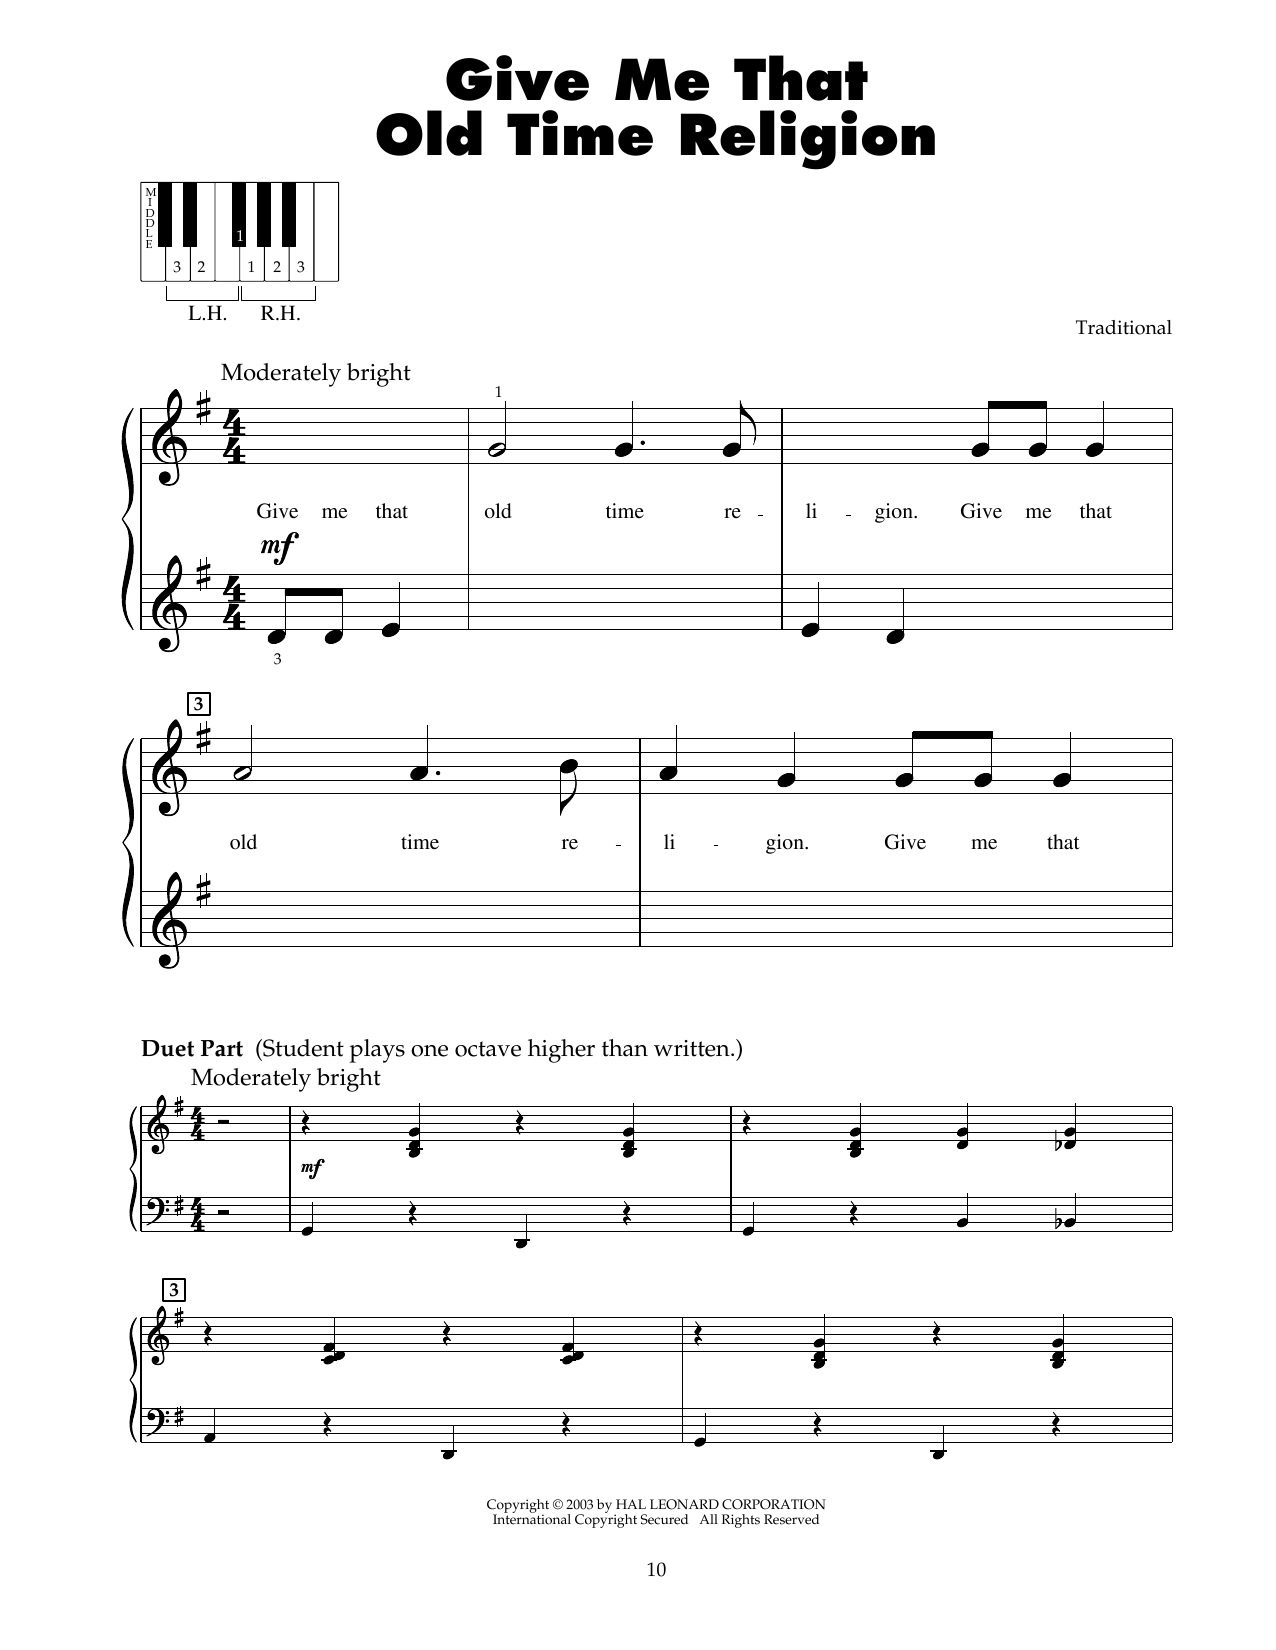 Download Traditional Give Me That Old Time Religion Sheet Music